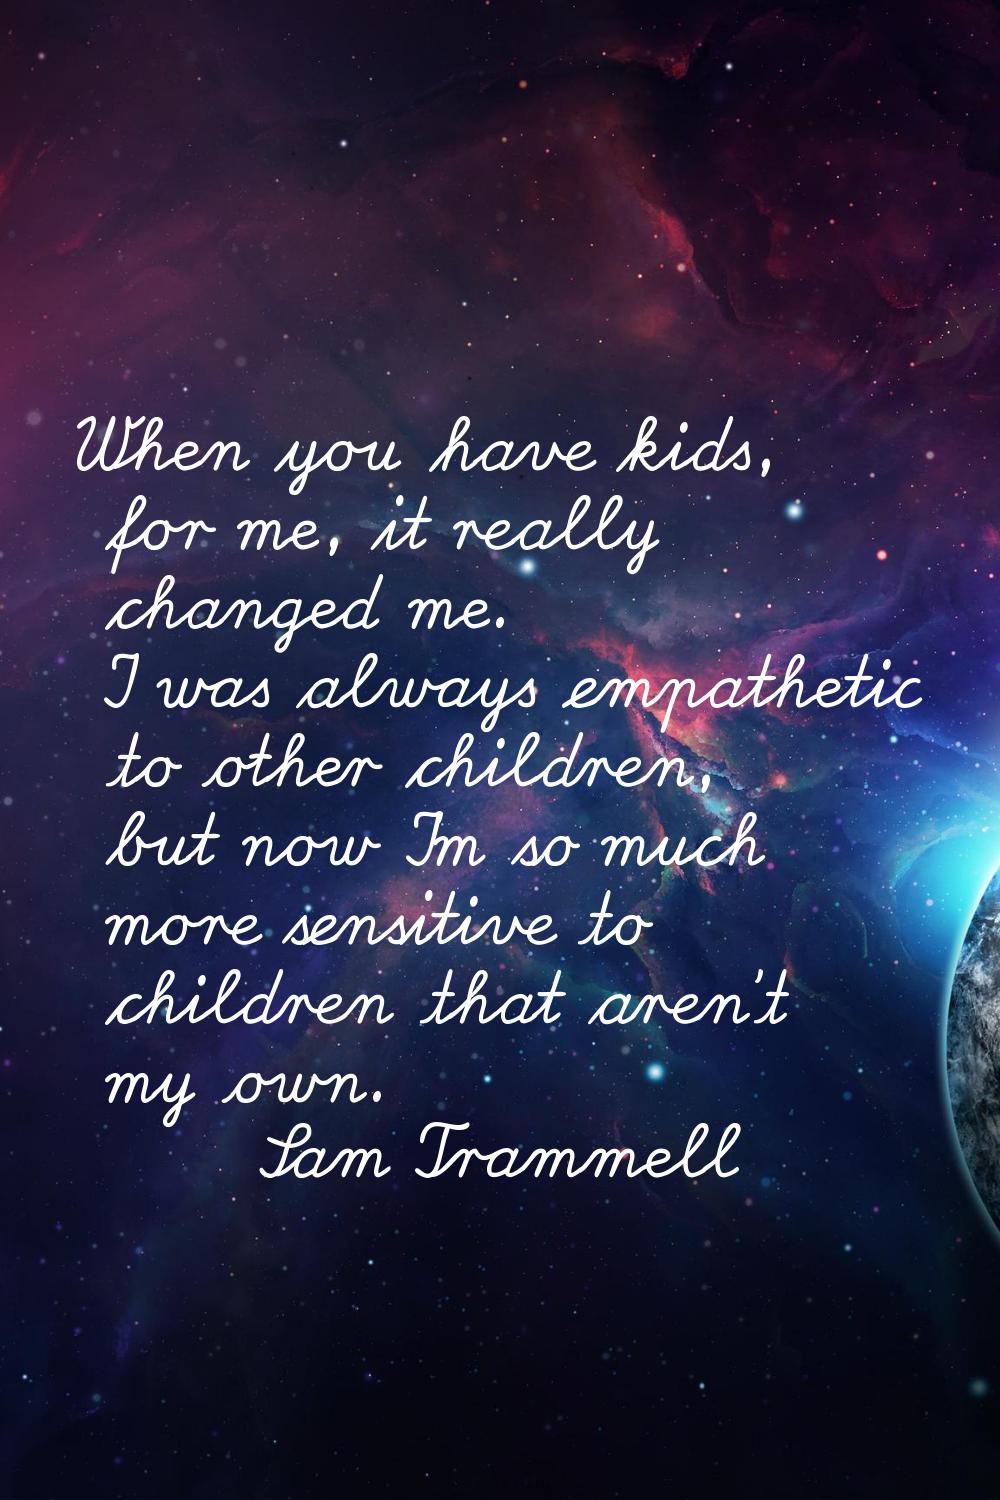 When you have kids, for me, it really changed me. I was always empathetic to other children, but no